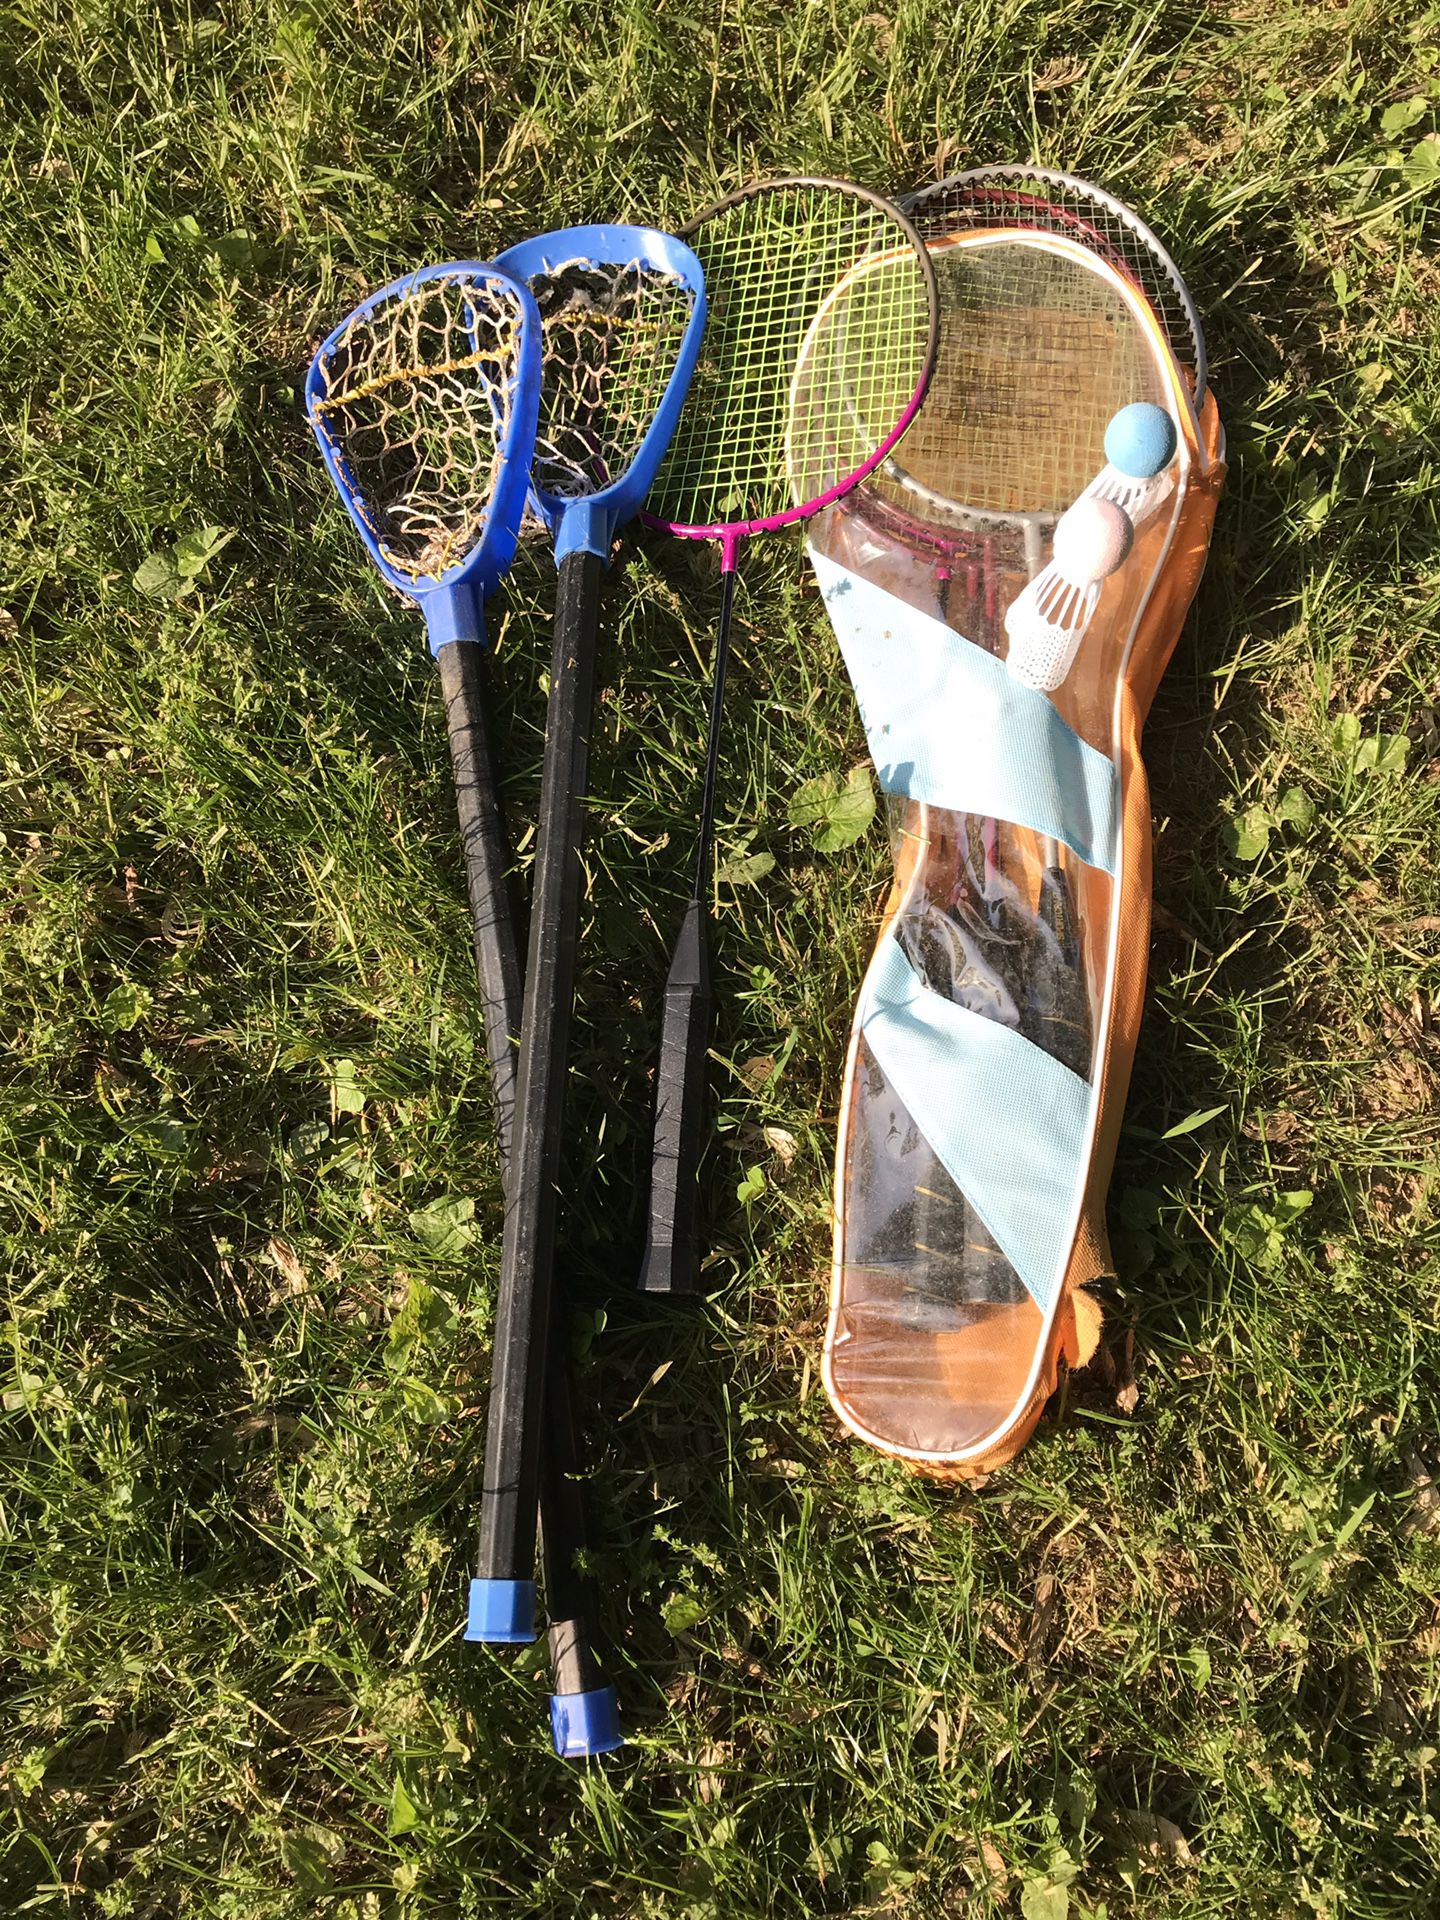 Youth lacrosse sticks and badminton